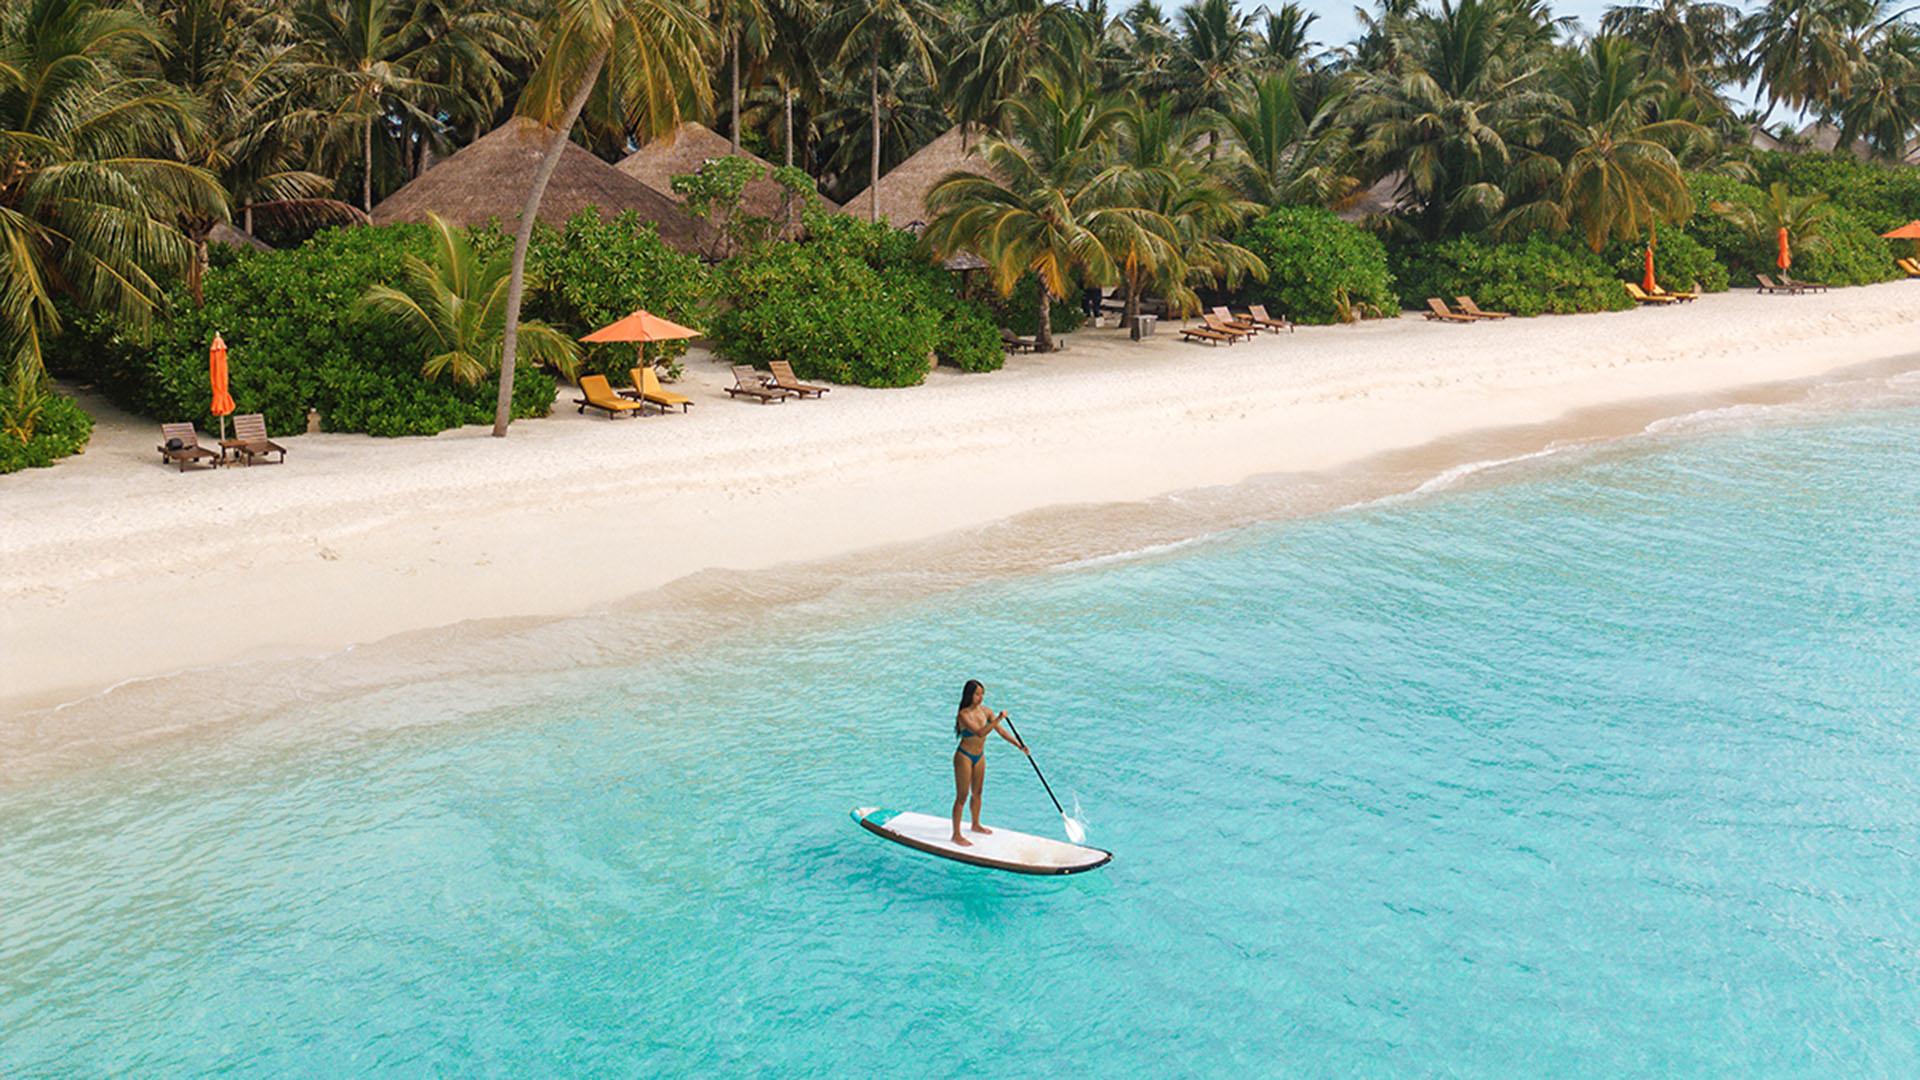 Stand-up paddleboarding adventure in the Maldives at Angsana Velavaru. Explore crystal-clear waters and discover the beauty of the resort.